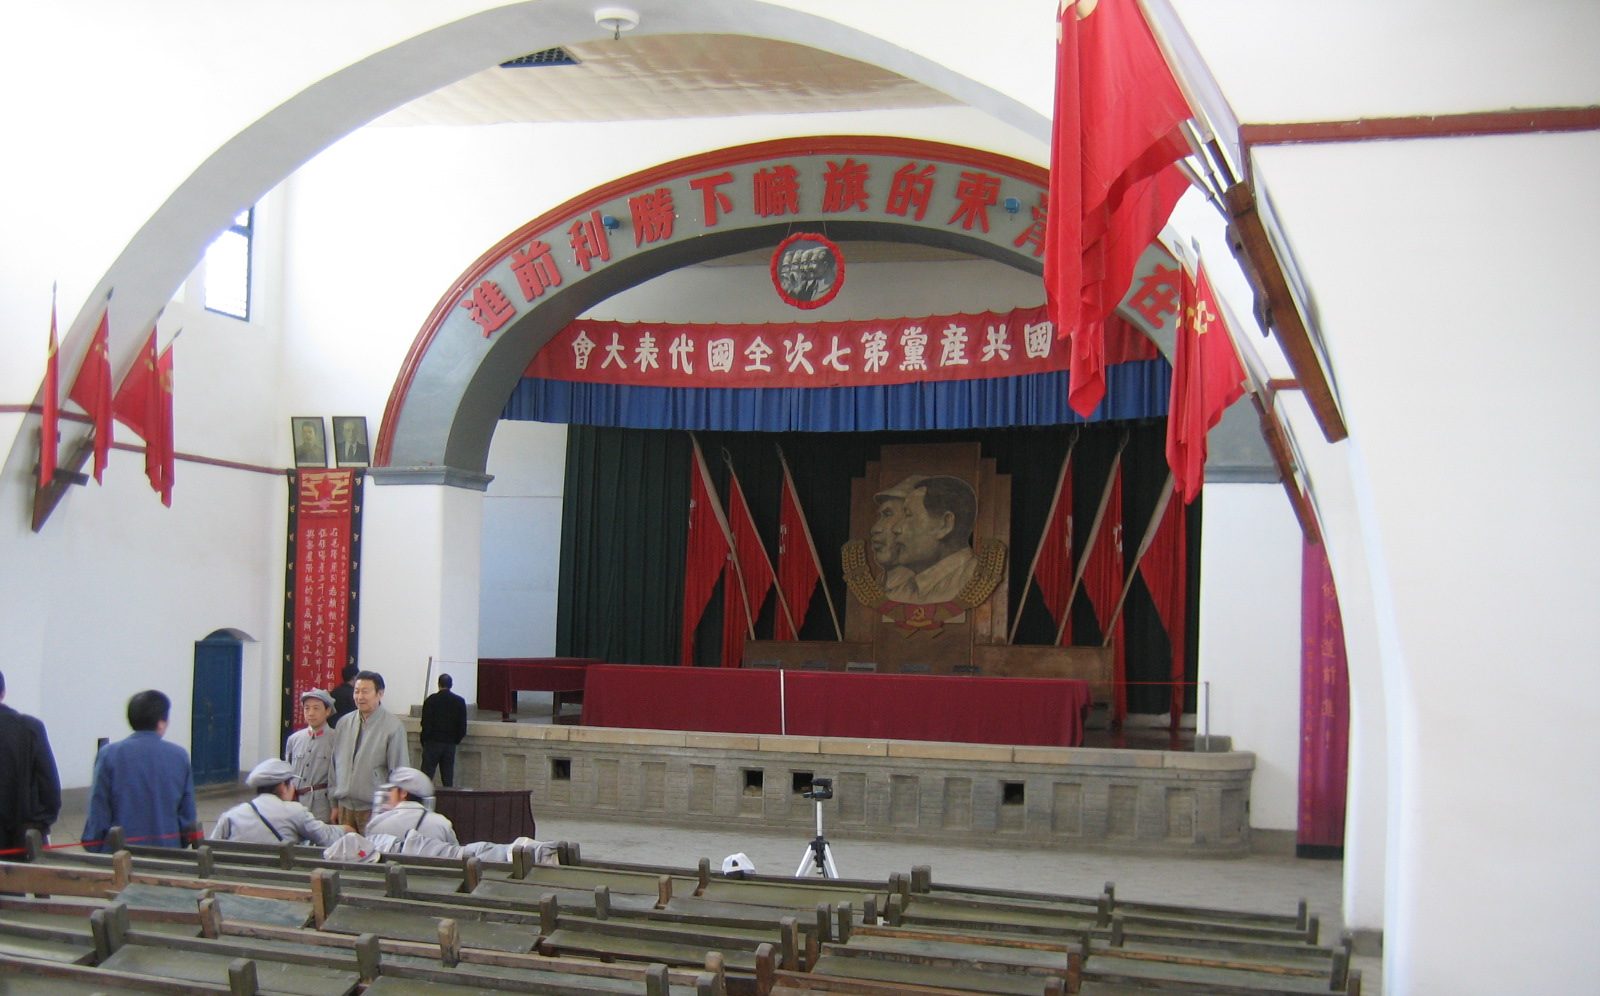 Yan'an China, a key conference room where China began along the path of joining socialist countries.